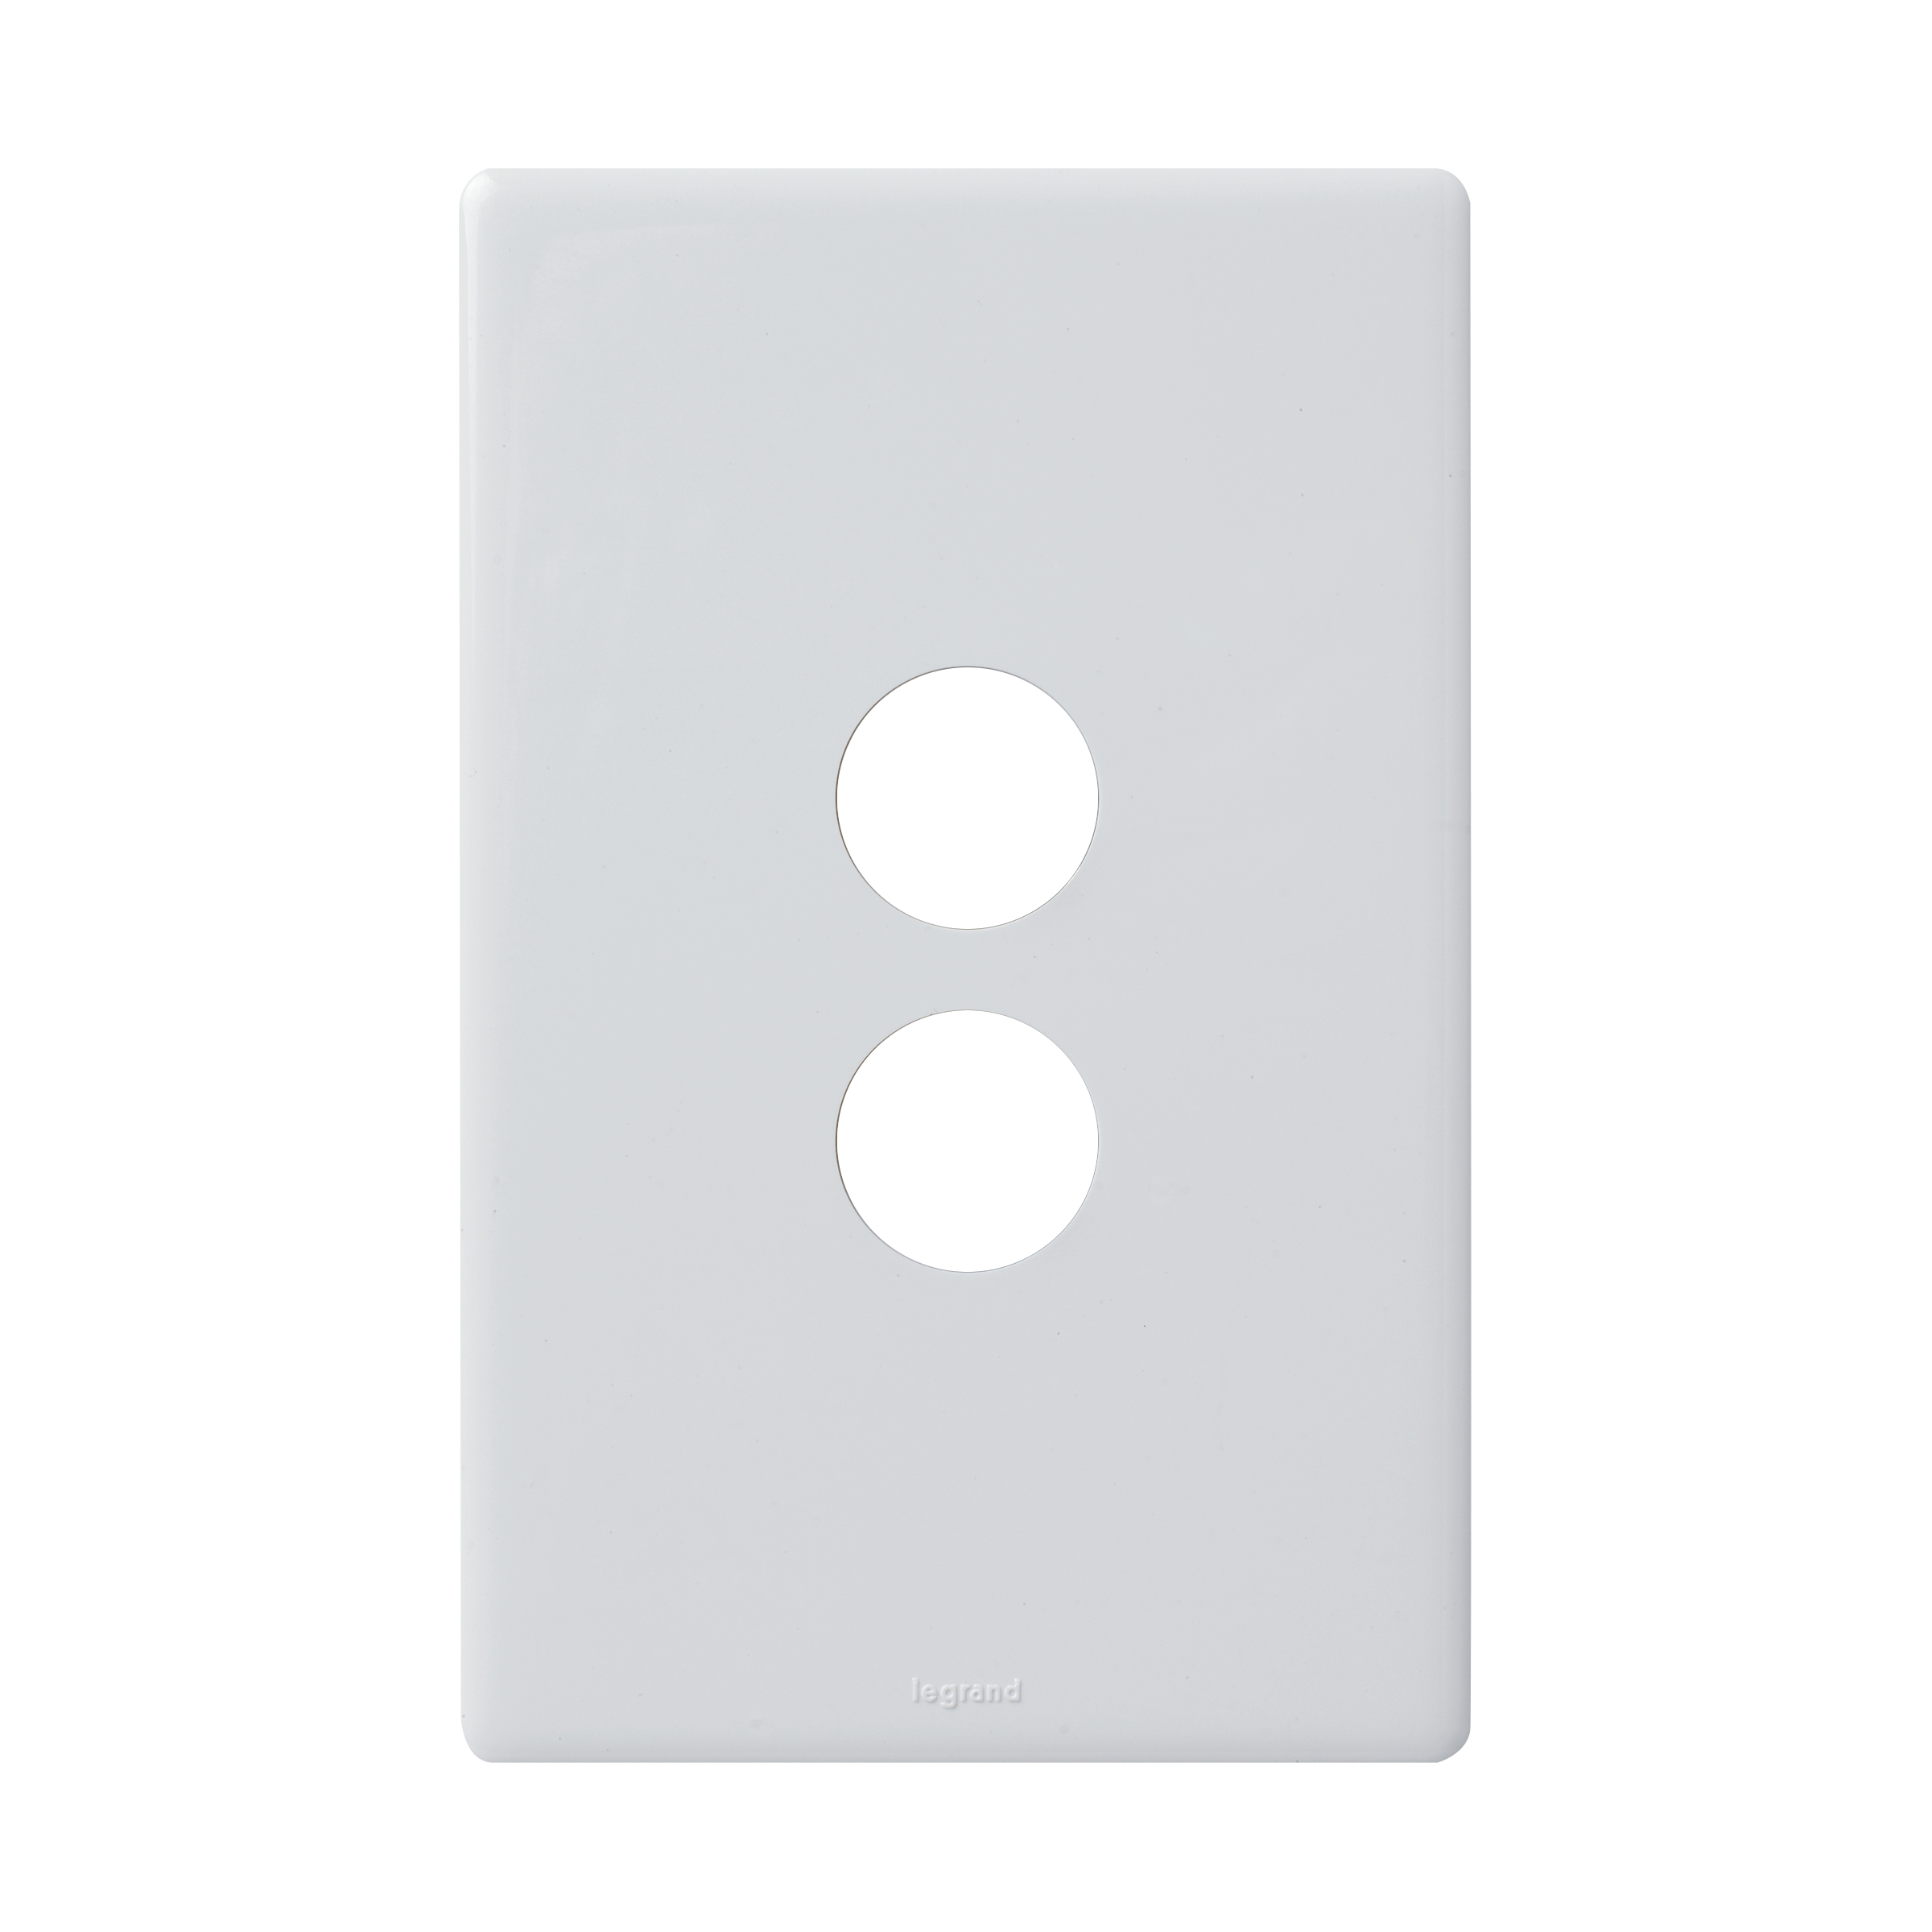 2-GANG GRID & COVERPLATE WHITE, EXCEL LIFE